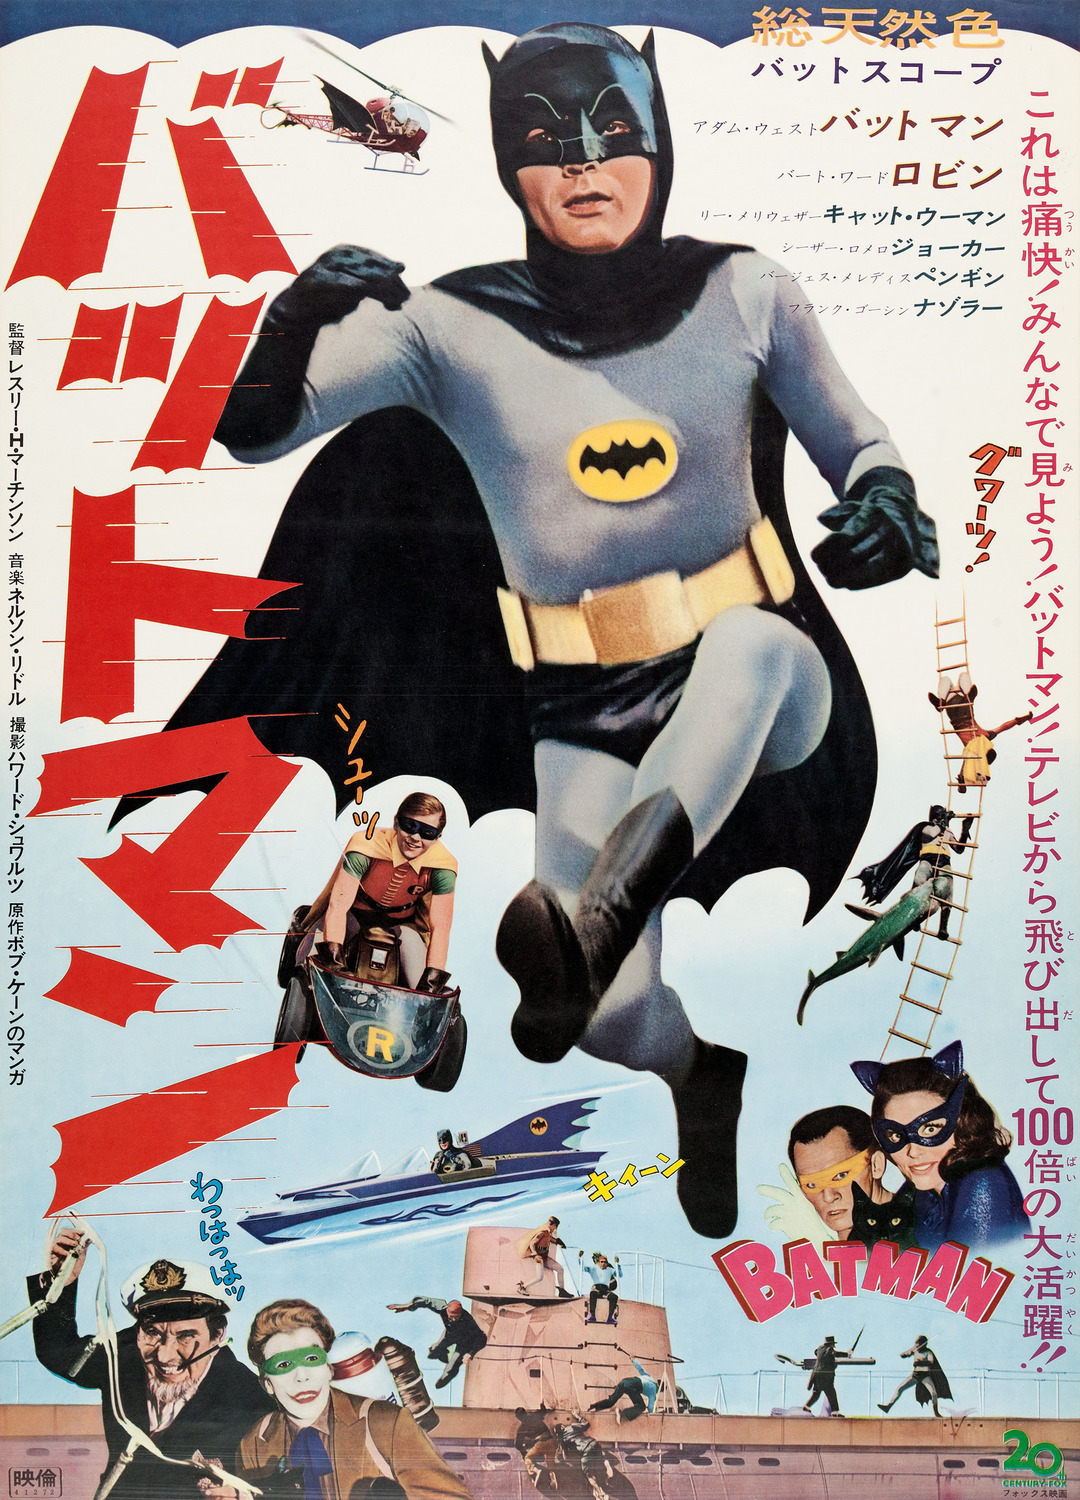 Extra Large Movie Poster Image for Batman (#4 of 4)